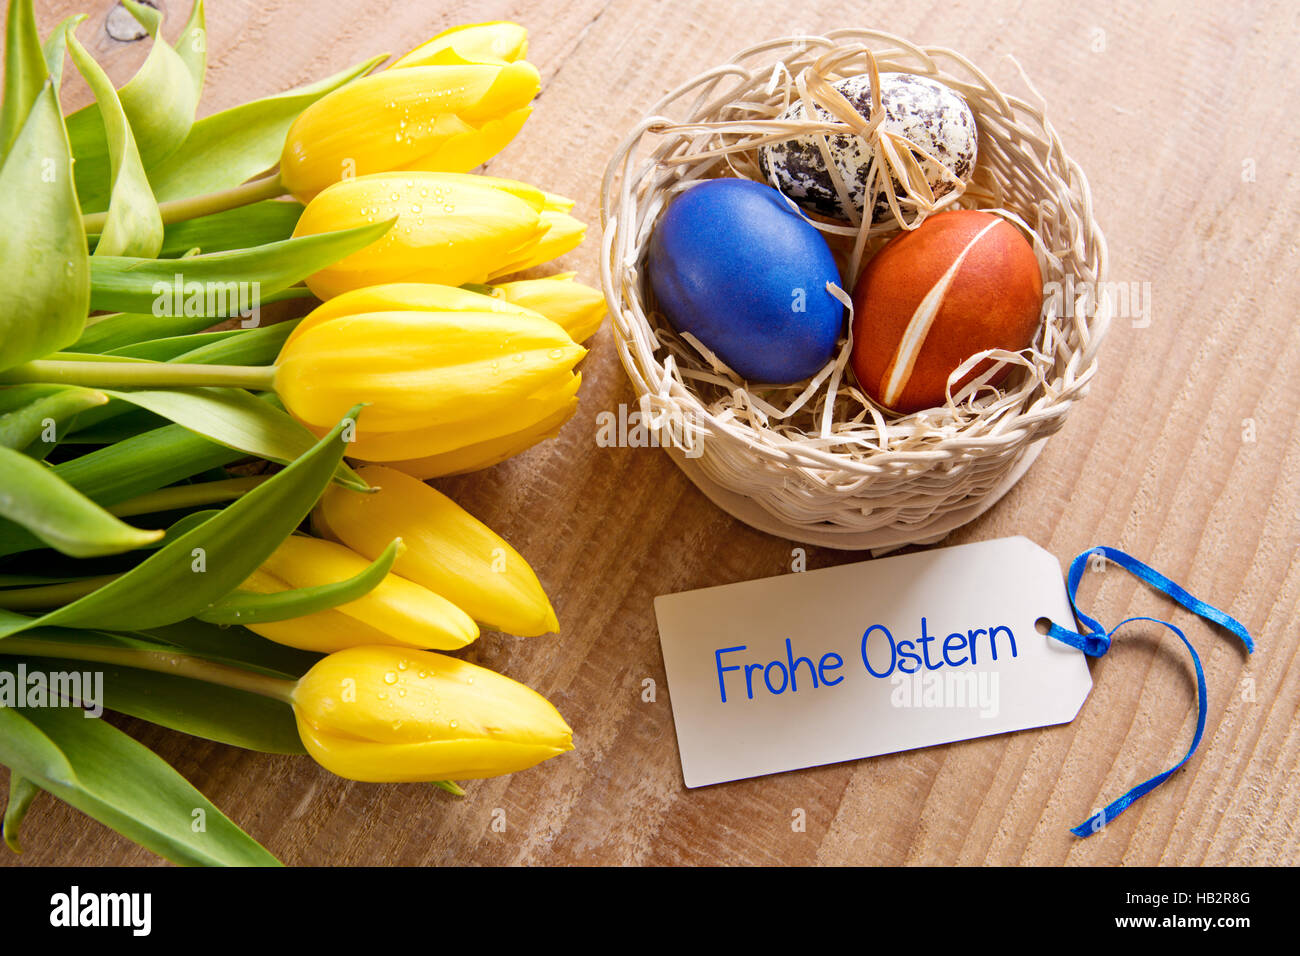 Frohe Ostern card and Easter basket. Stock Photo